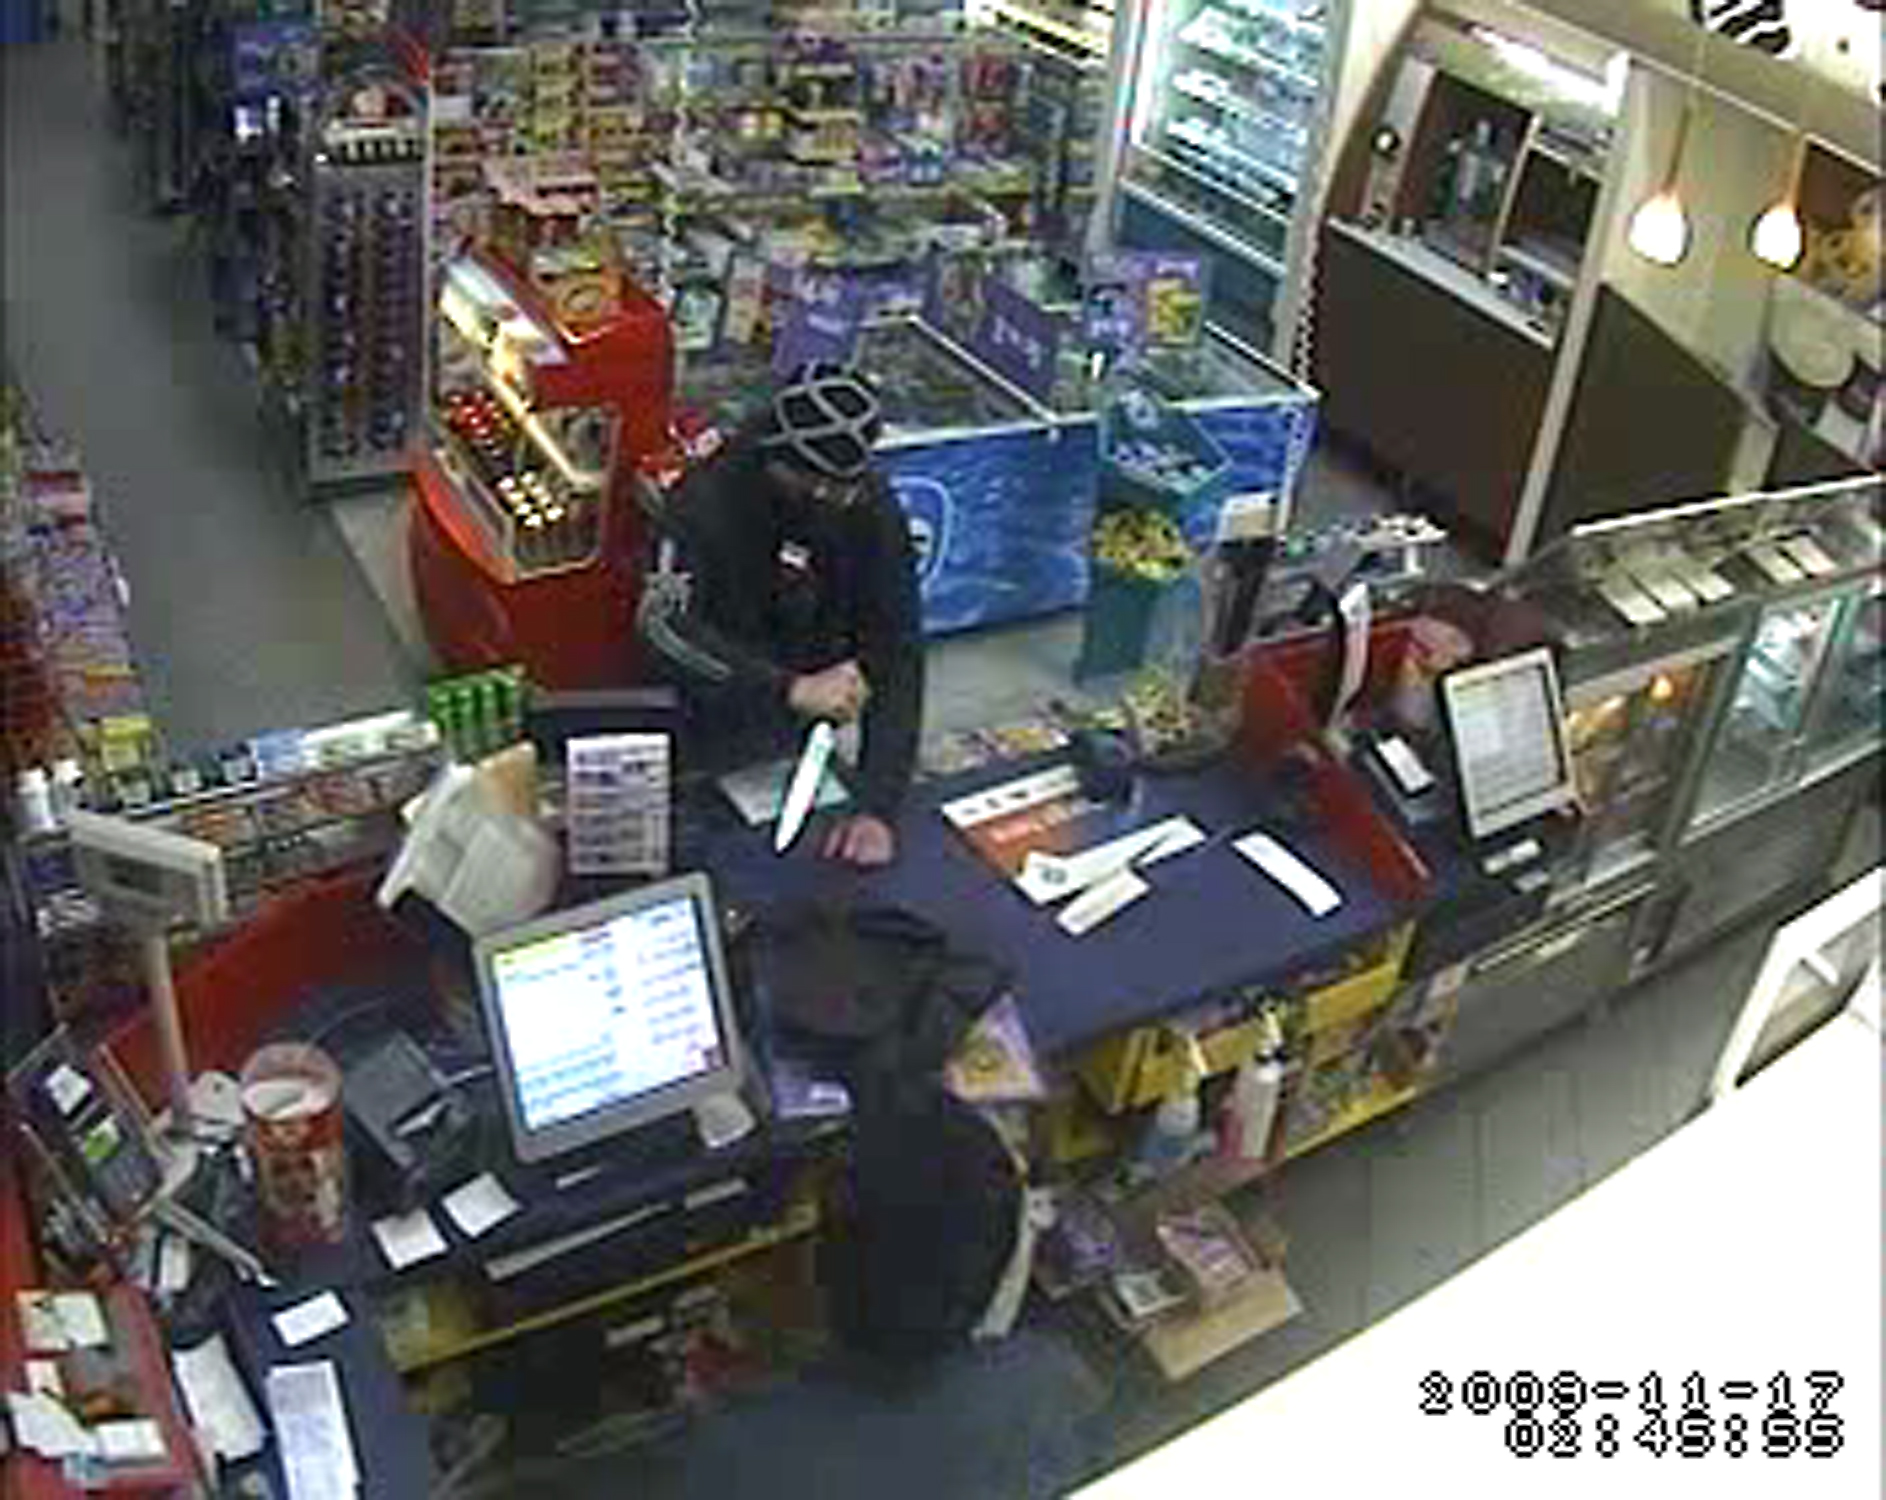 A still taken from CCTV footage of the Caltex service station aggravated robbery in Braddon (1 of 2)